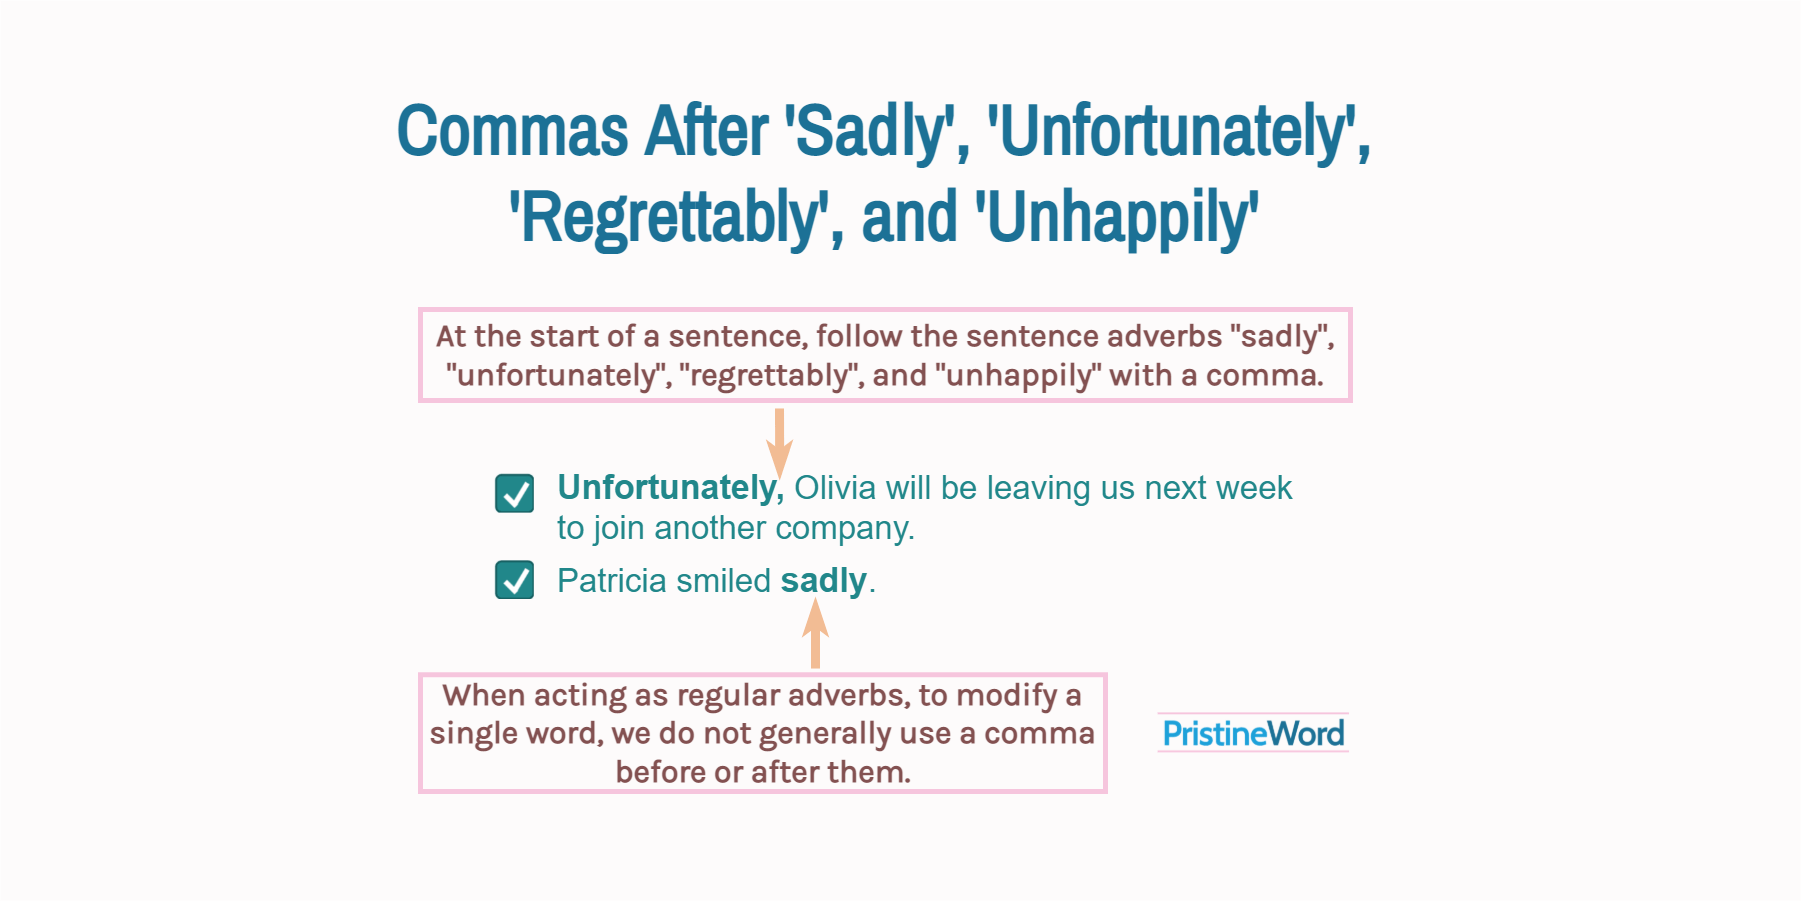 Commas After 'Sadly', 'Unfortunately', 'Regrettably', and 'Unhappily'